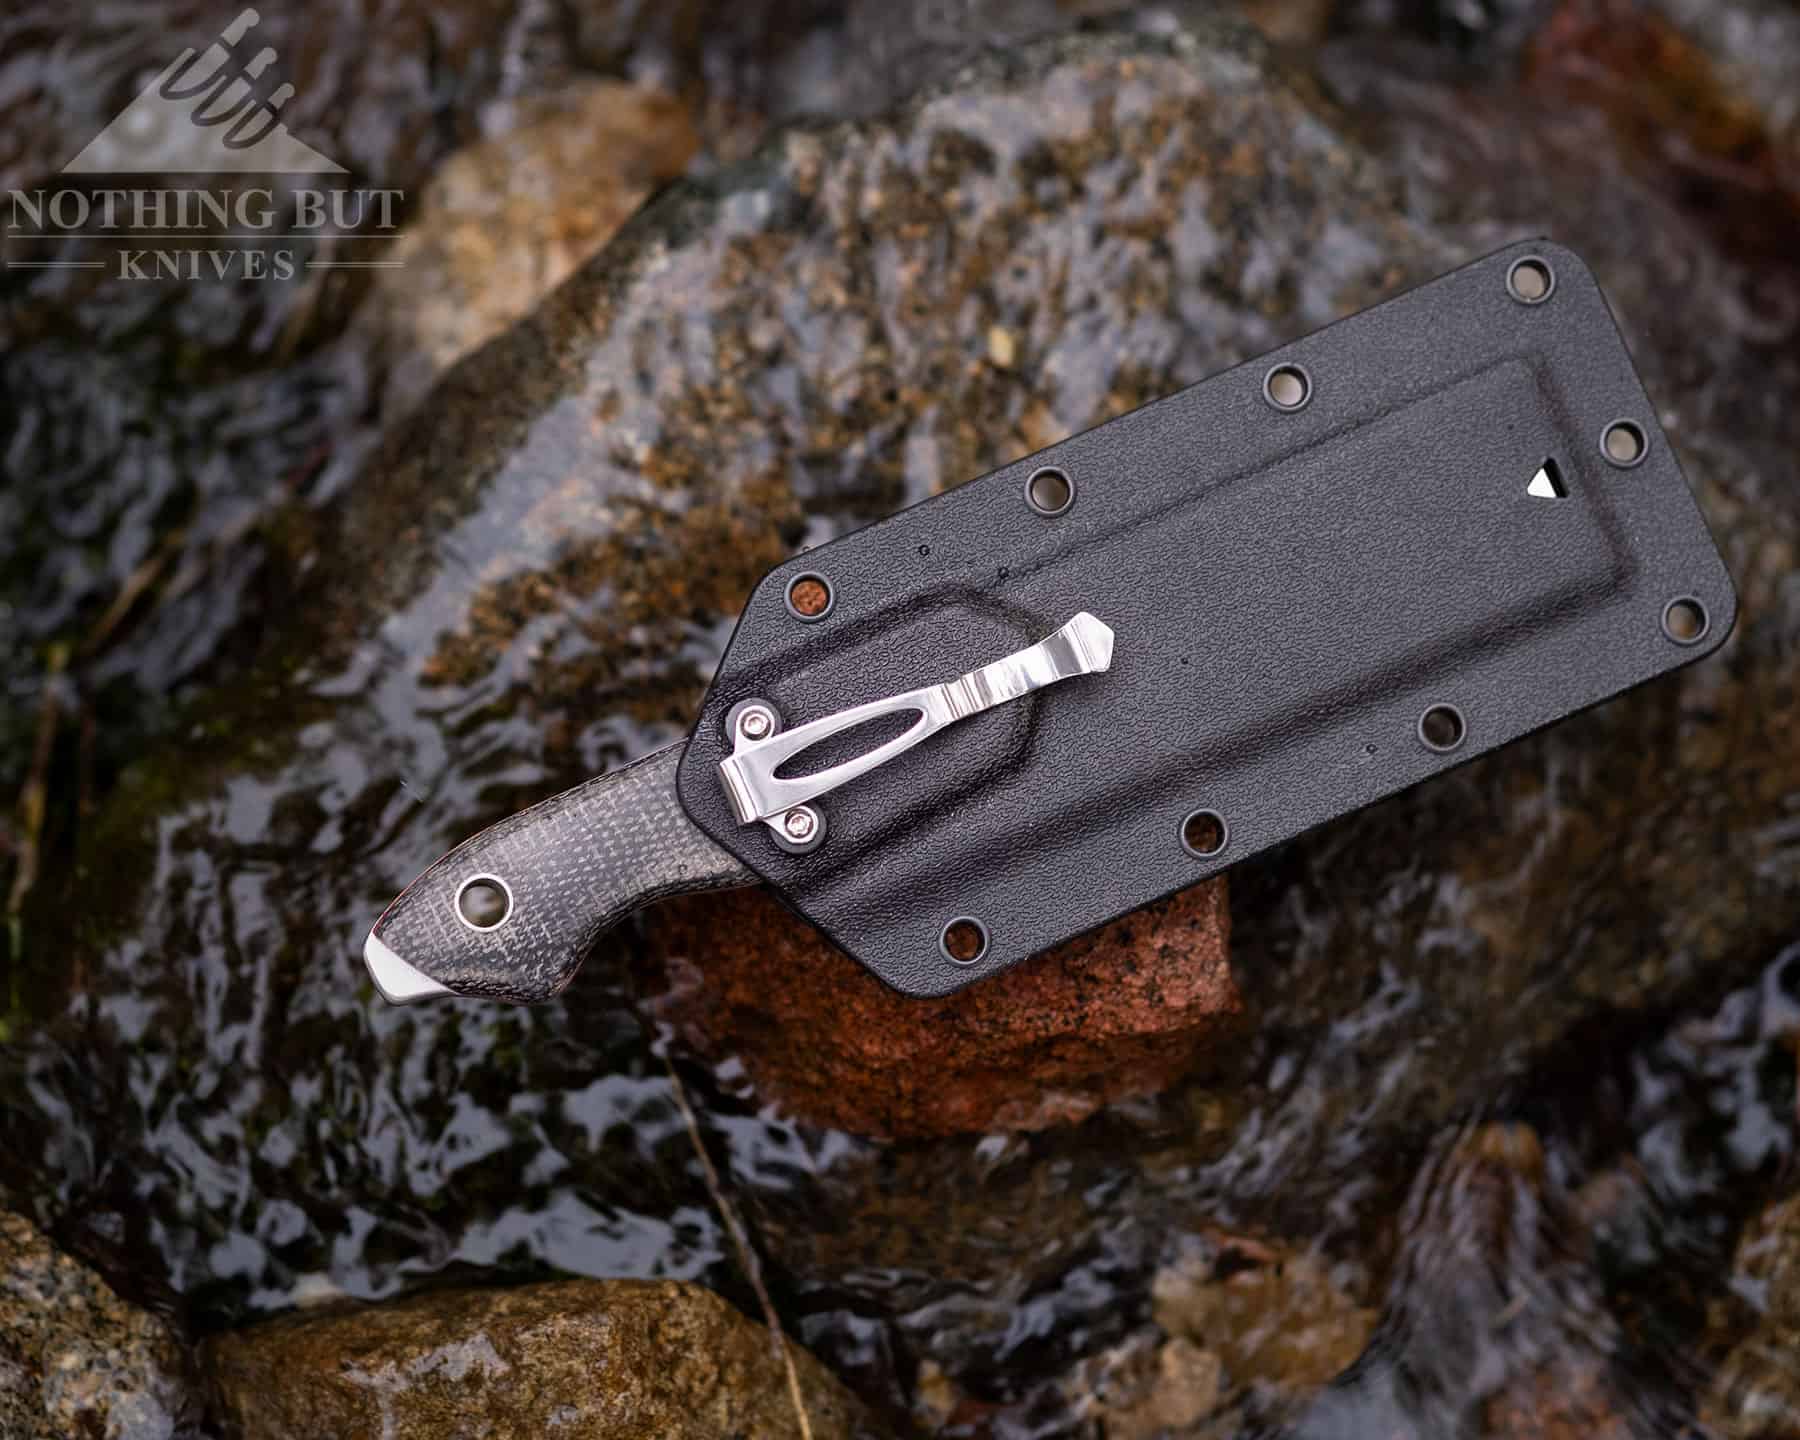 The CRKT Razel ships with a well designed Kydex sheath.